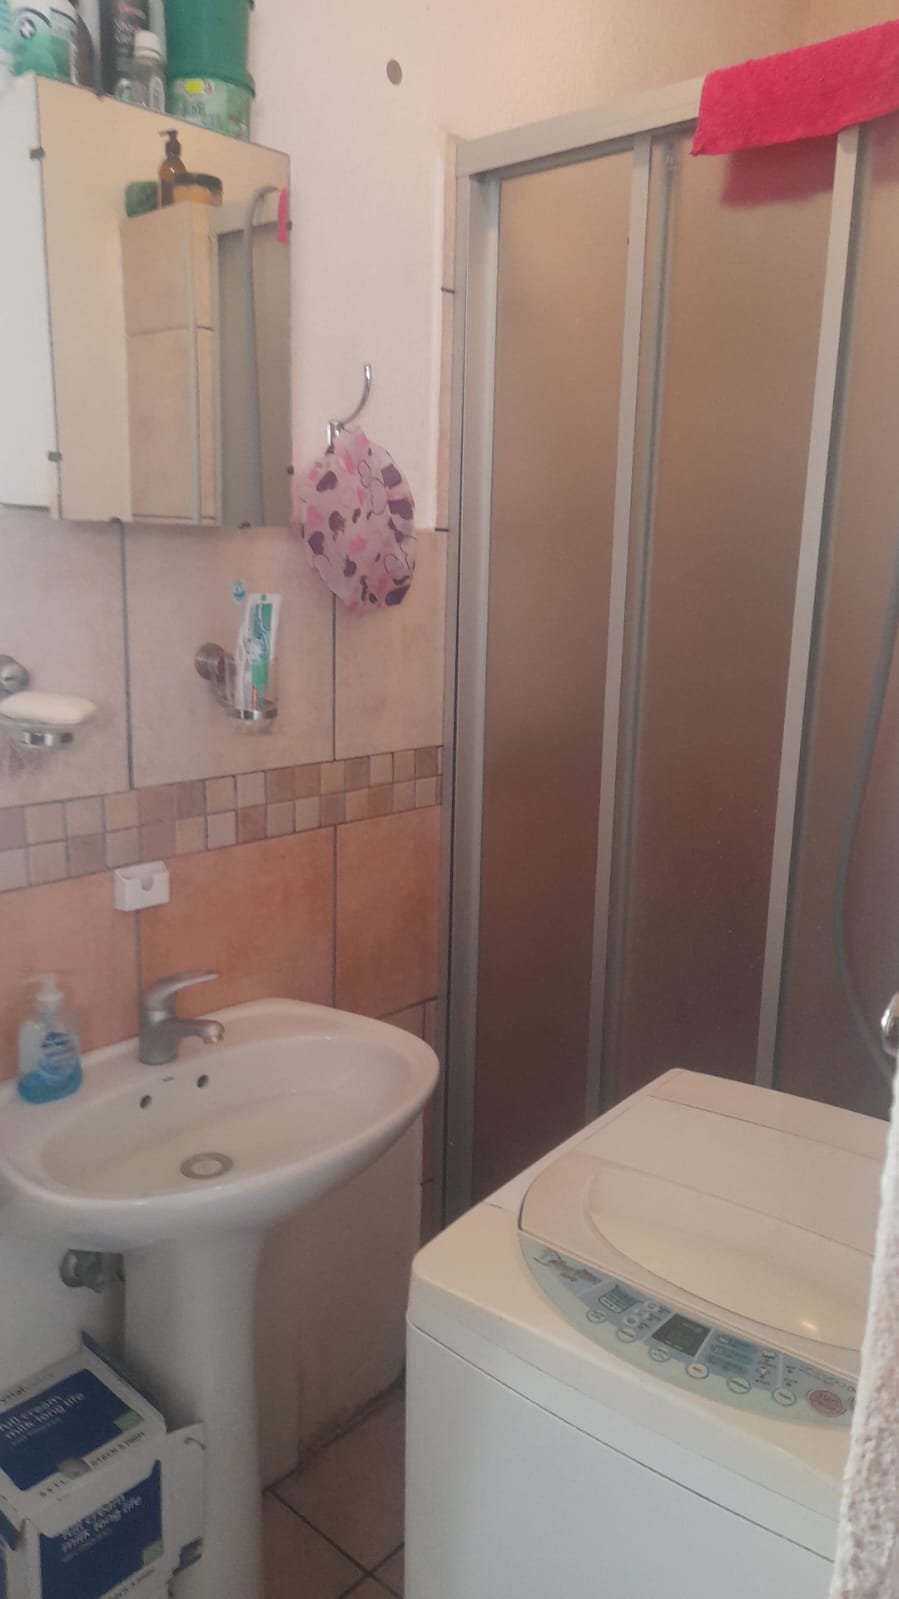 Room for rent in Horizon Park Gauteng. Listed by PropertyCentral